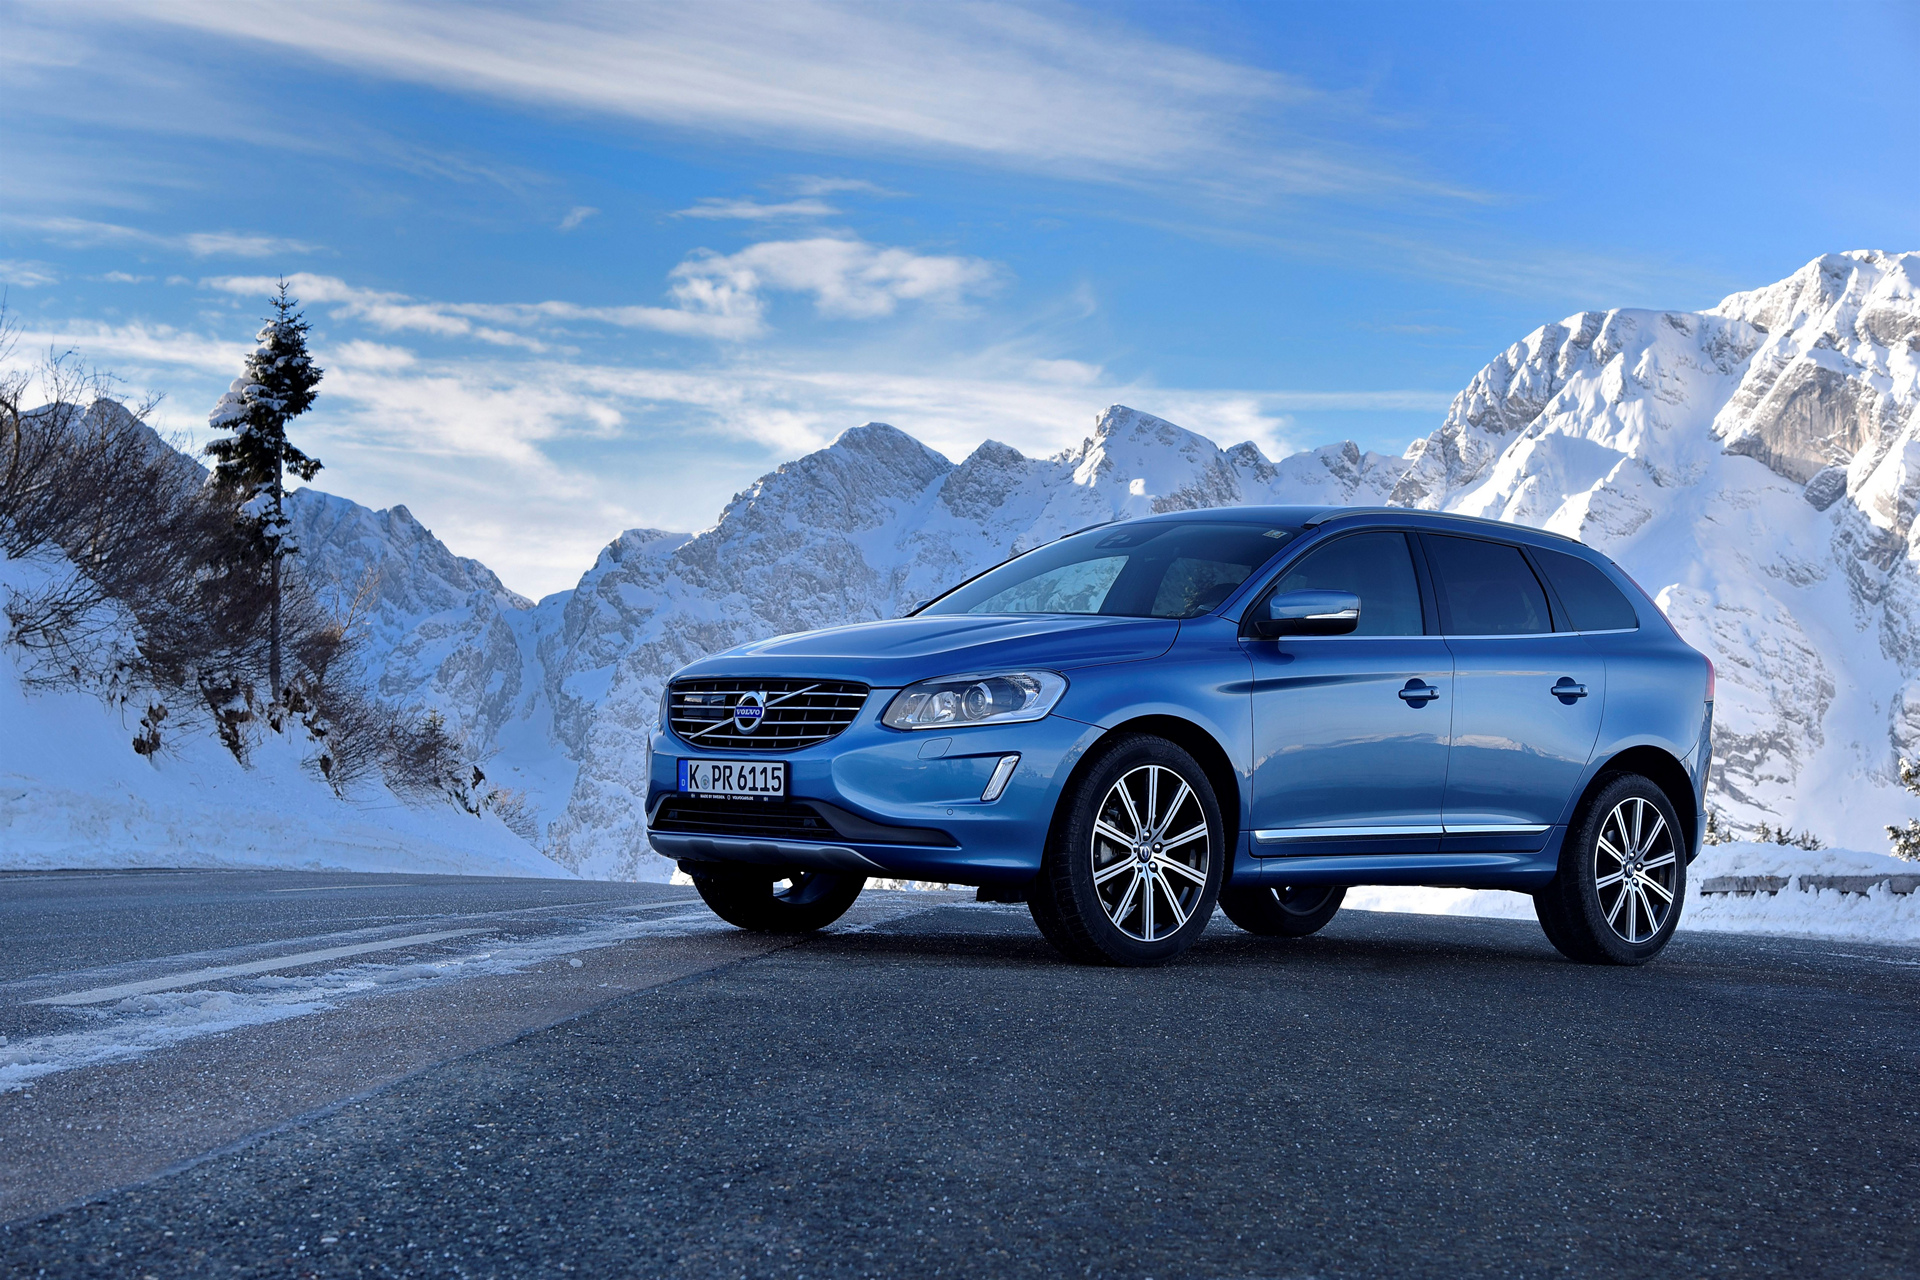 Volvo XC60 © Zhejiang Geely Holding Group Co., Ltd